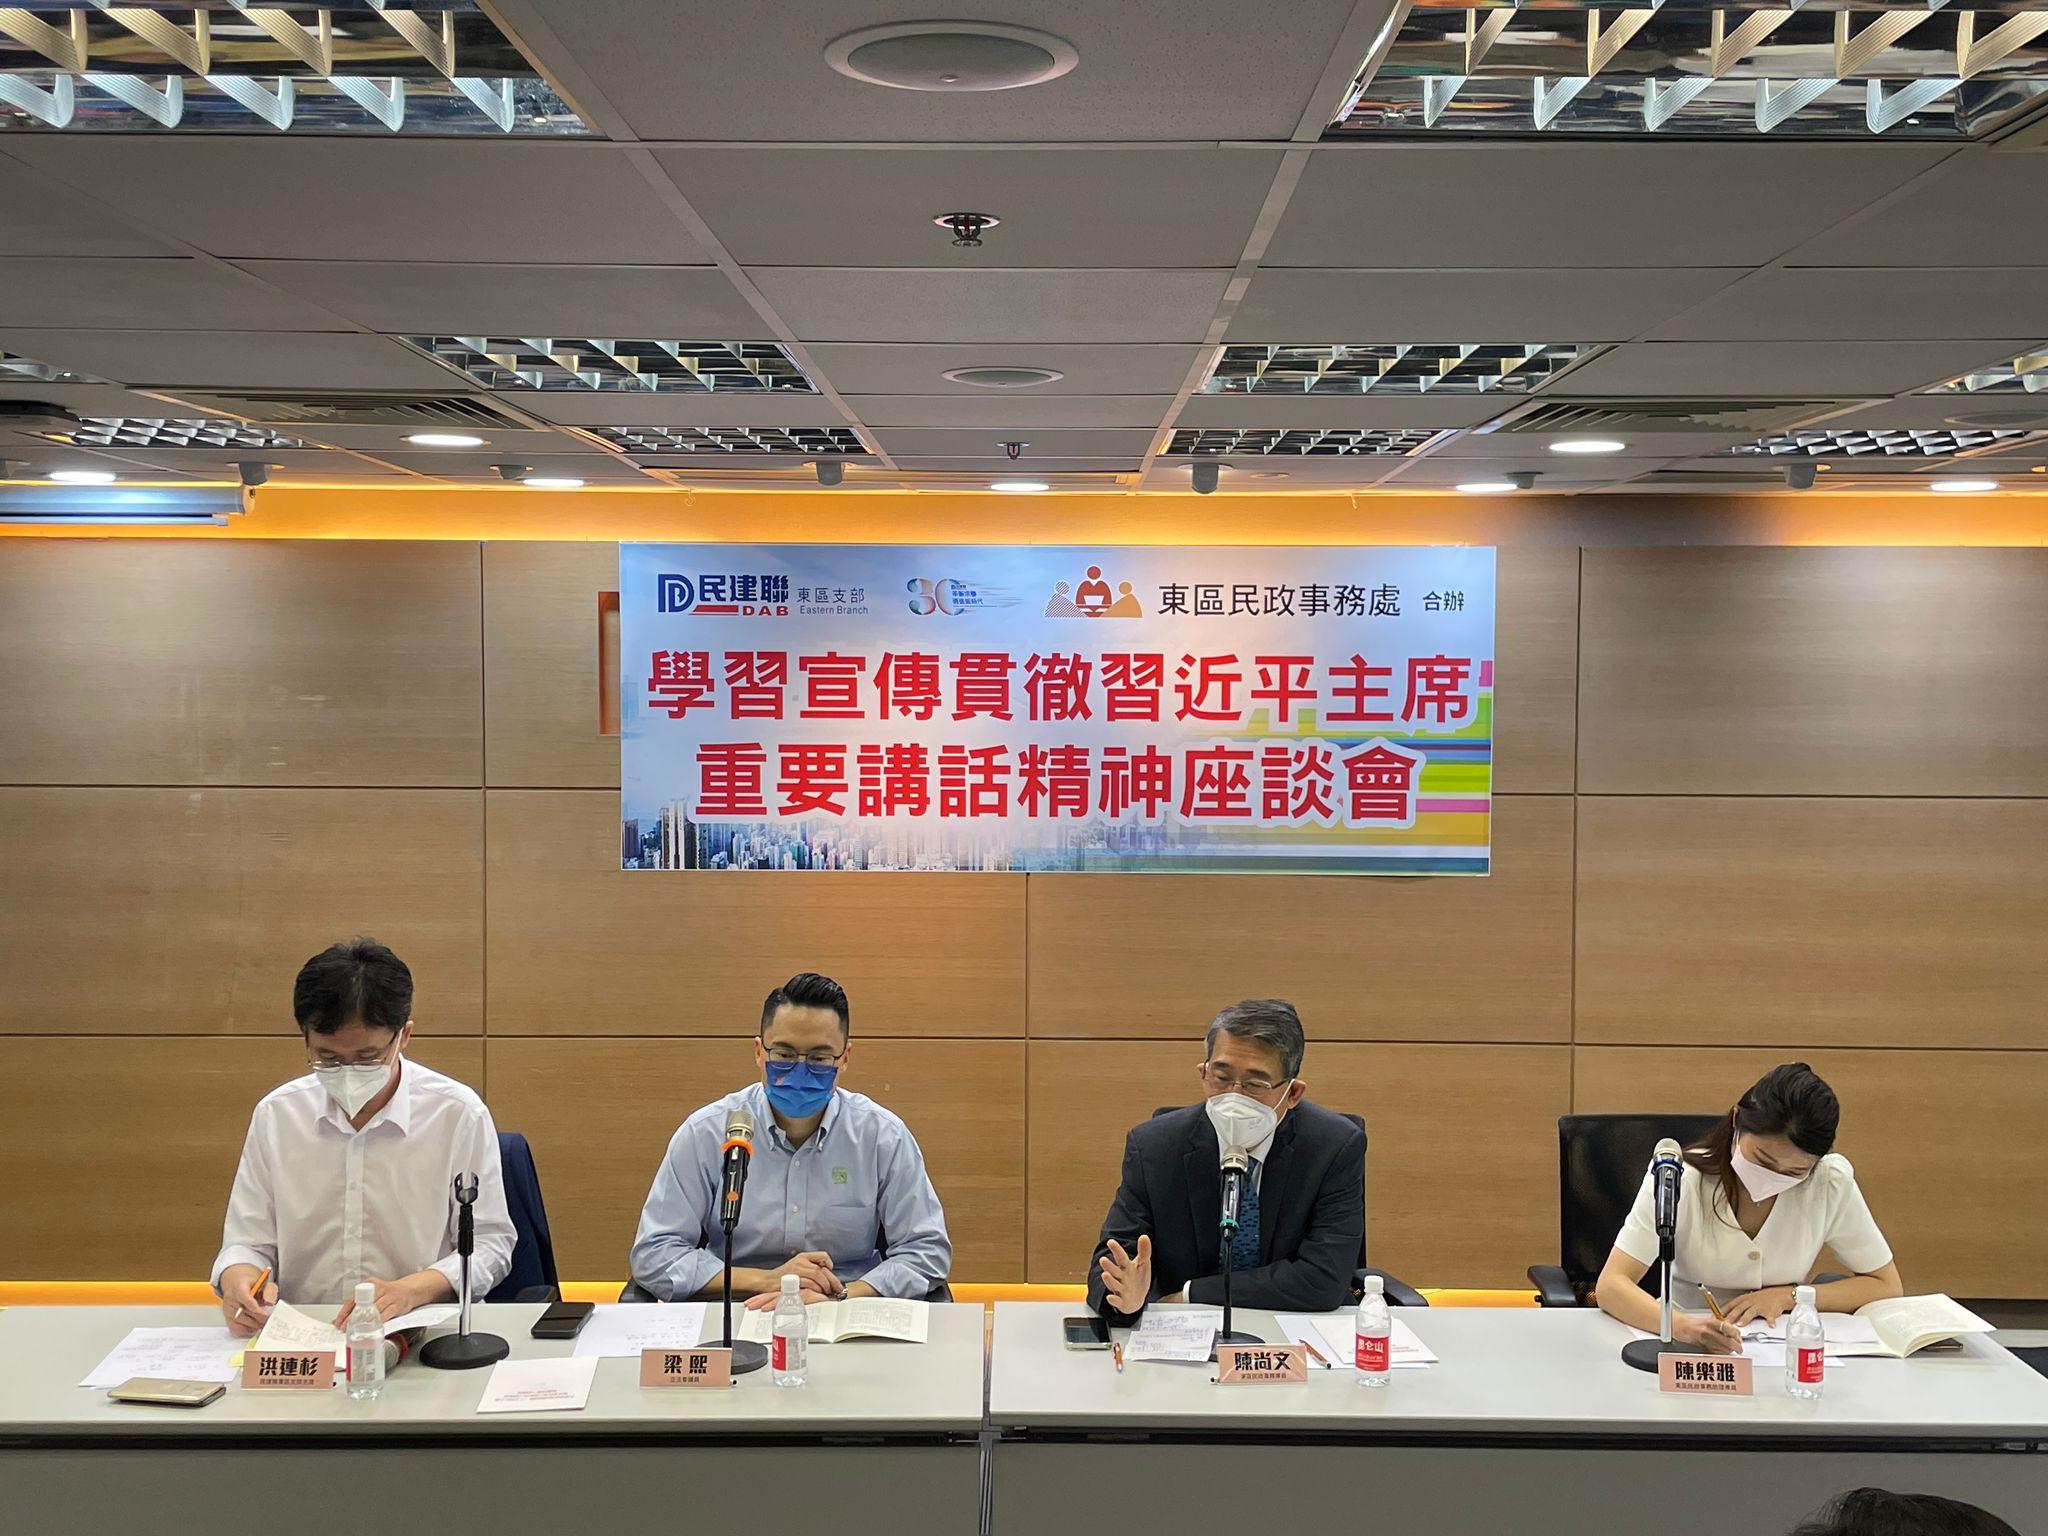 The East District Office, together with the Eastern Branch of the Democratic Alliance for the Betterment and Progress of Hong Kong, held the "Session on Learn About and Implement the Spirit of President Xi's Important Speech" on July 16 in Fortress Hill. Photo shows the District Officer (Eastern), Mr Simon Chan (second right), delivering a speech at the session.